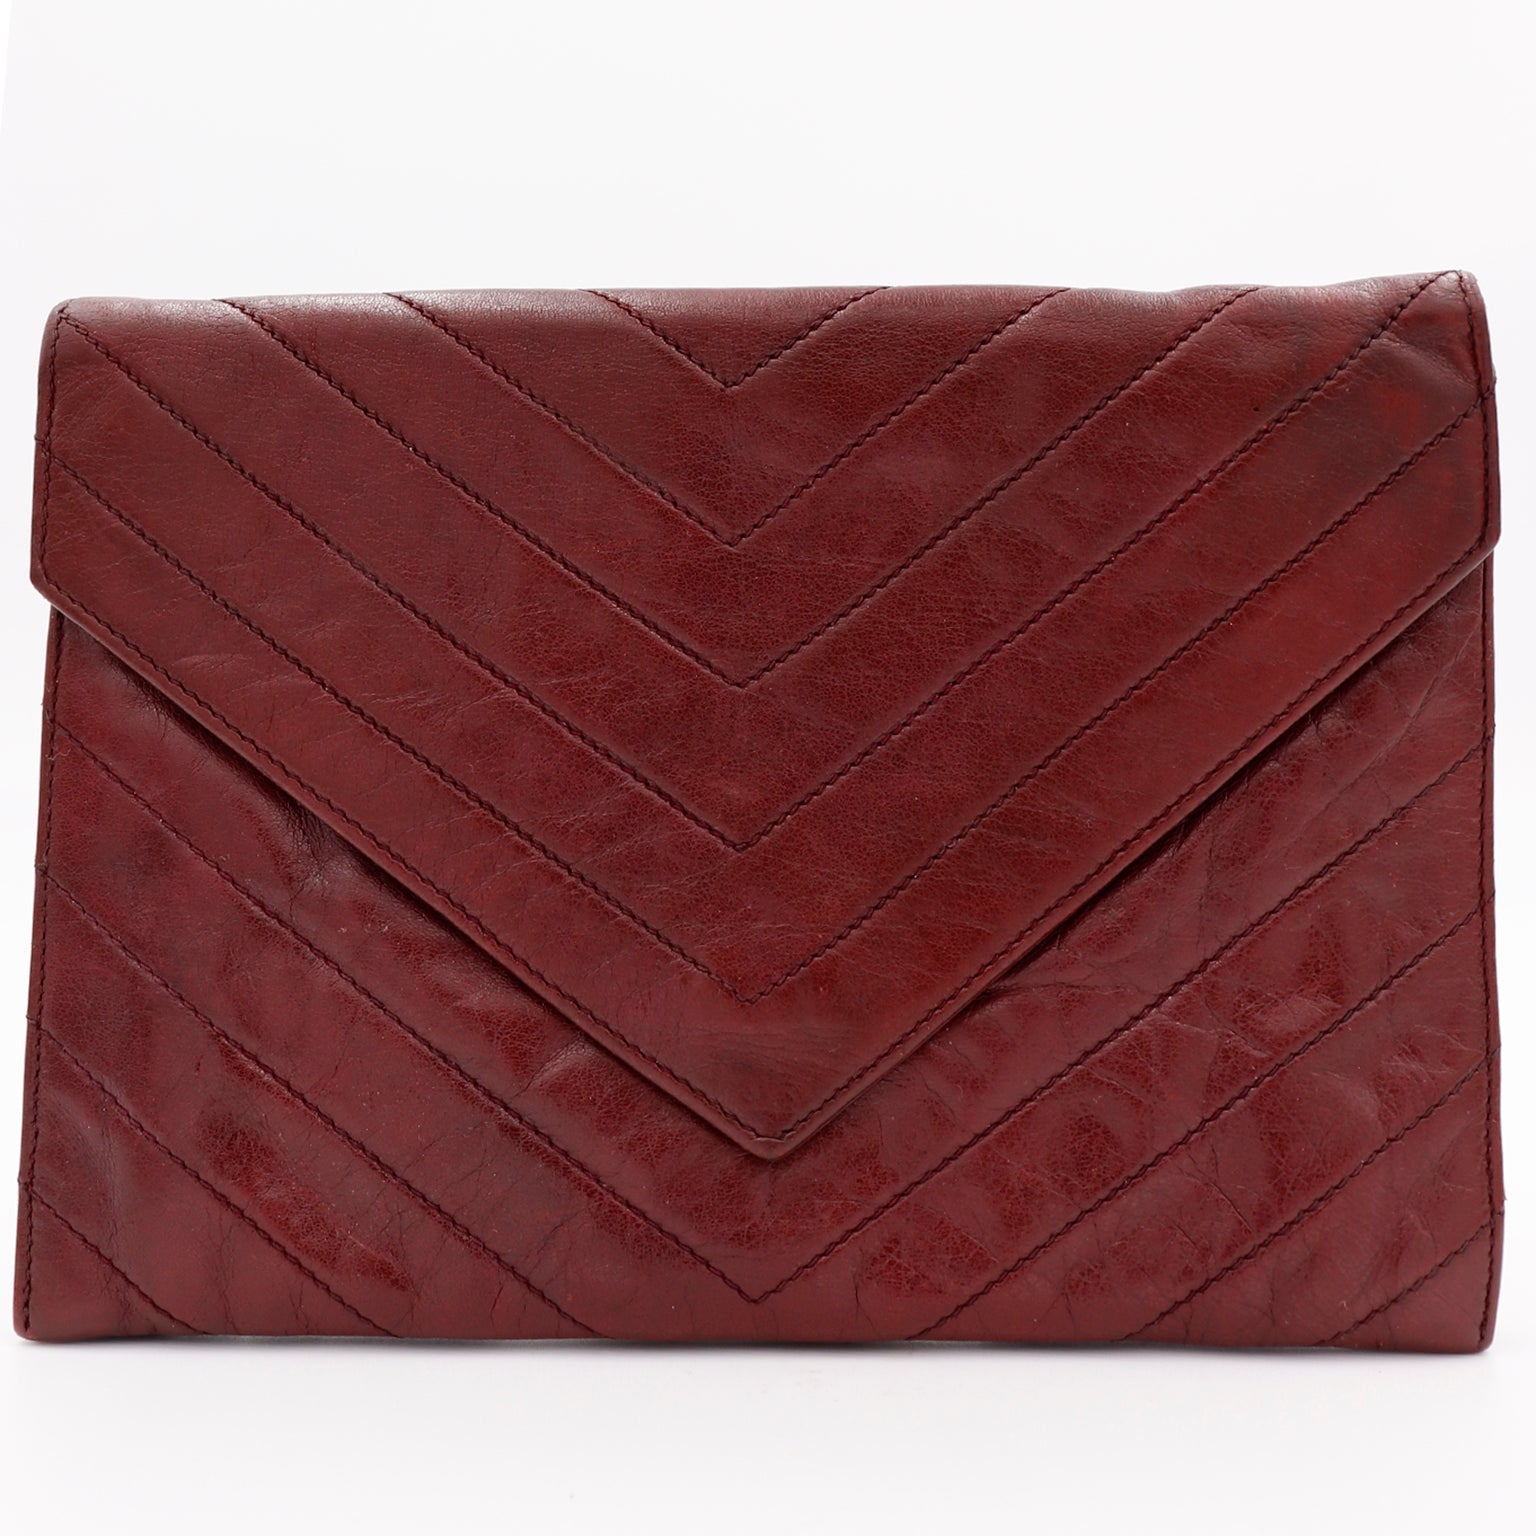 Leather clutch bag Yves Saint Laurent Burgundy in Leather - 28945615